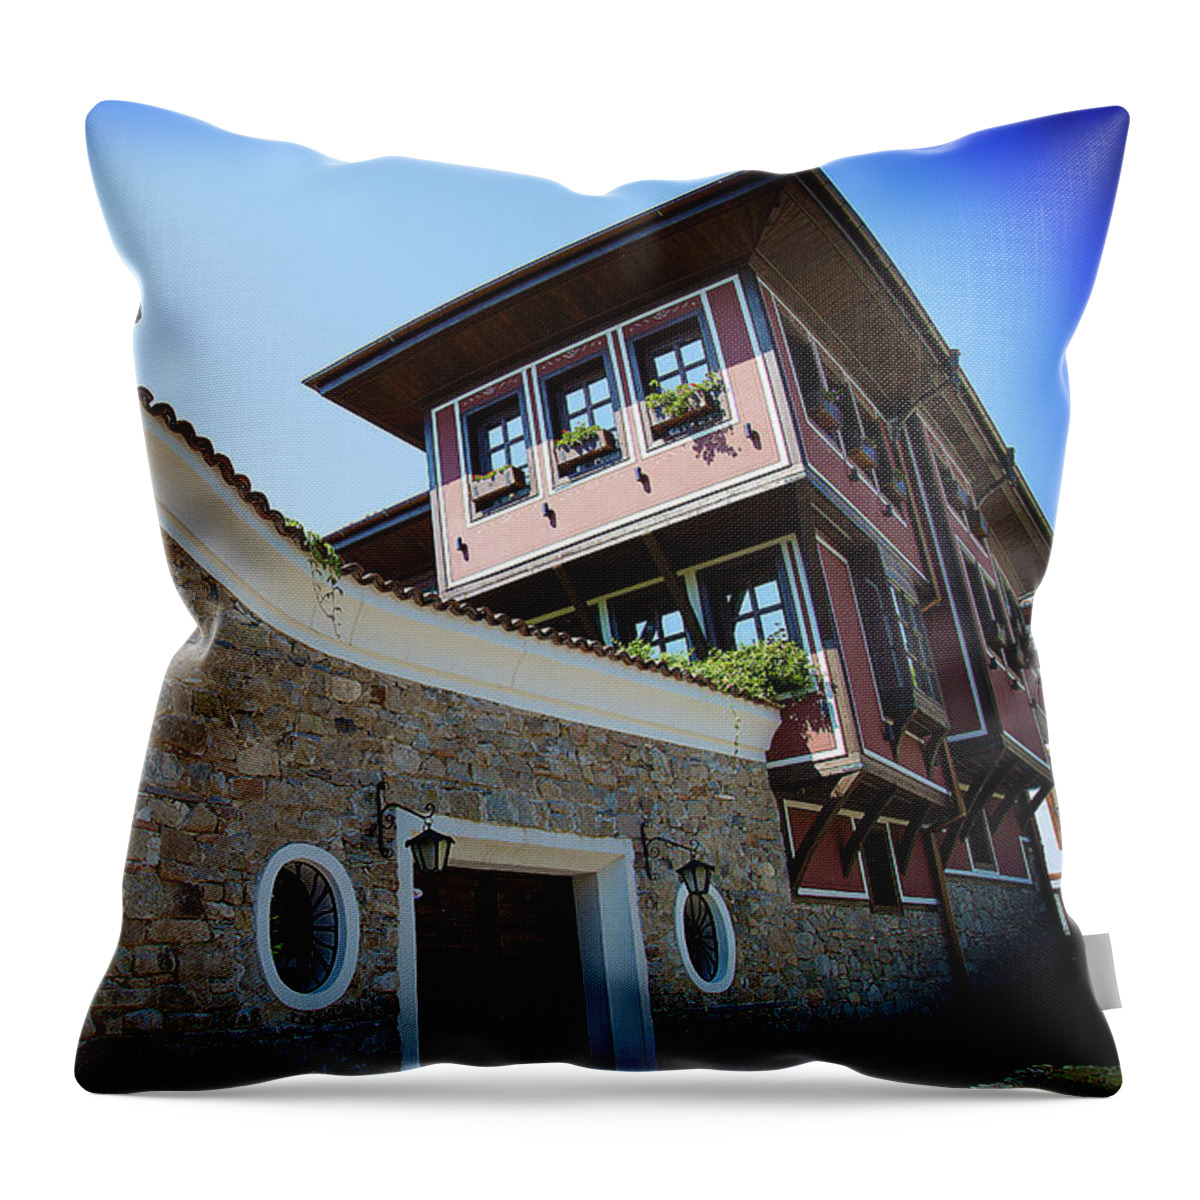 Plovdiv Throw Pillow featuring the photograph Old Town Plovdiv by Milena Ilieva